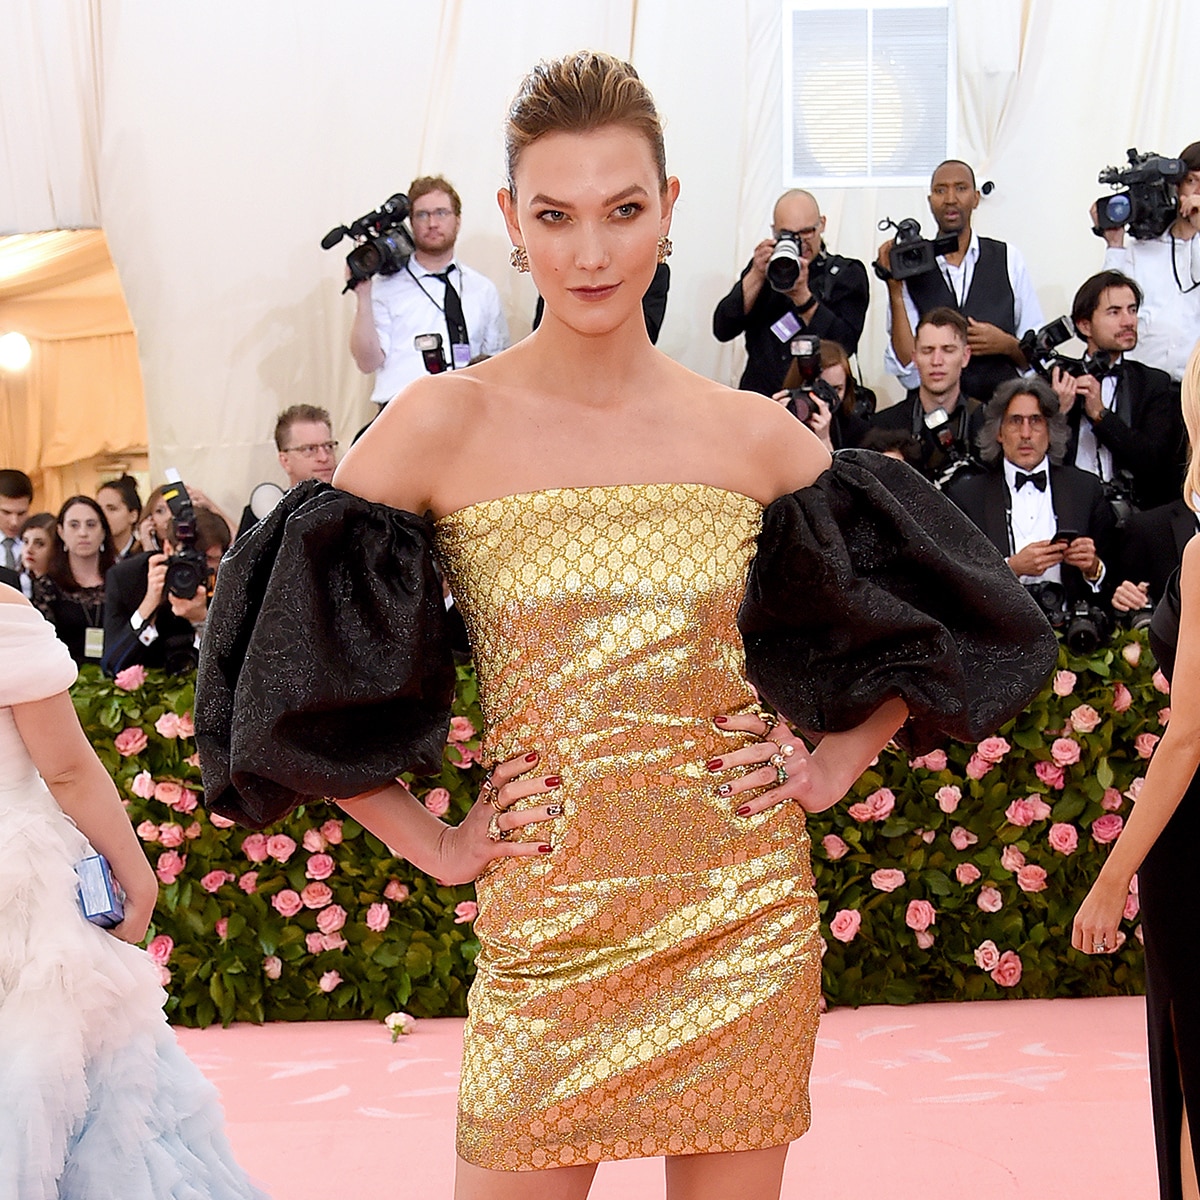 Karlie Kloss News, Pictures, and Videos - E! Online